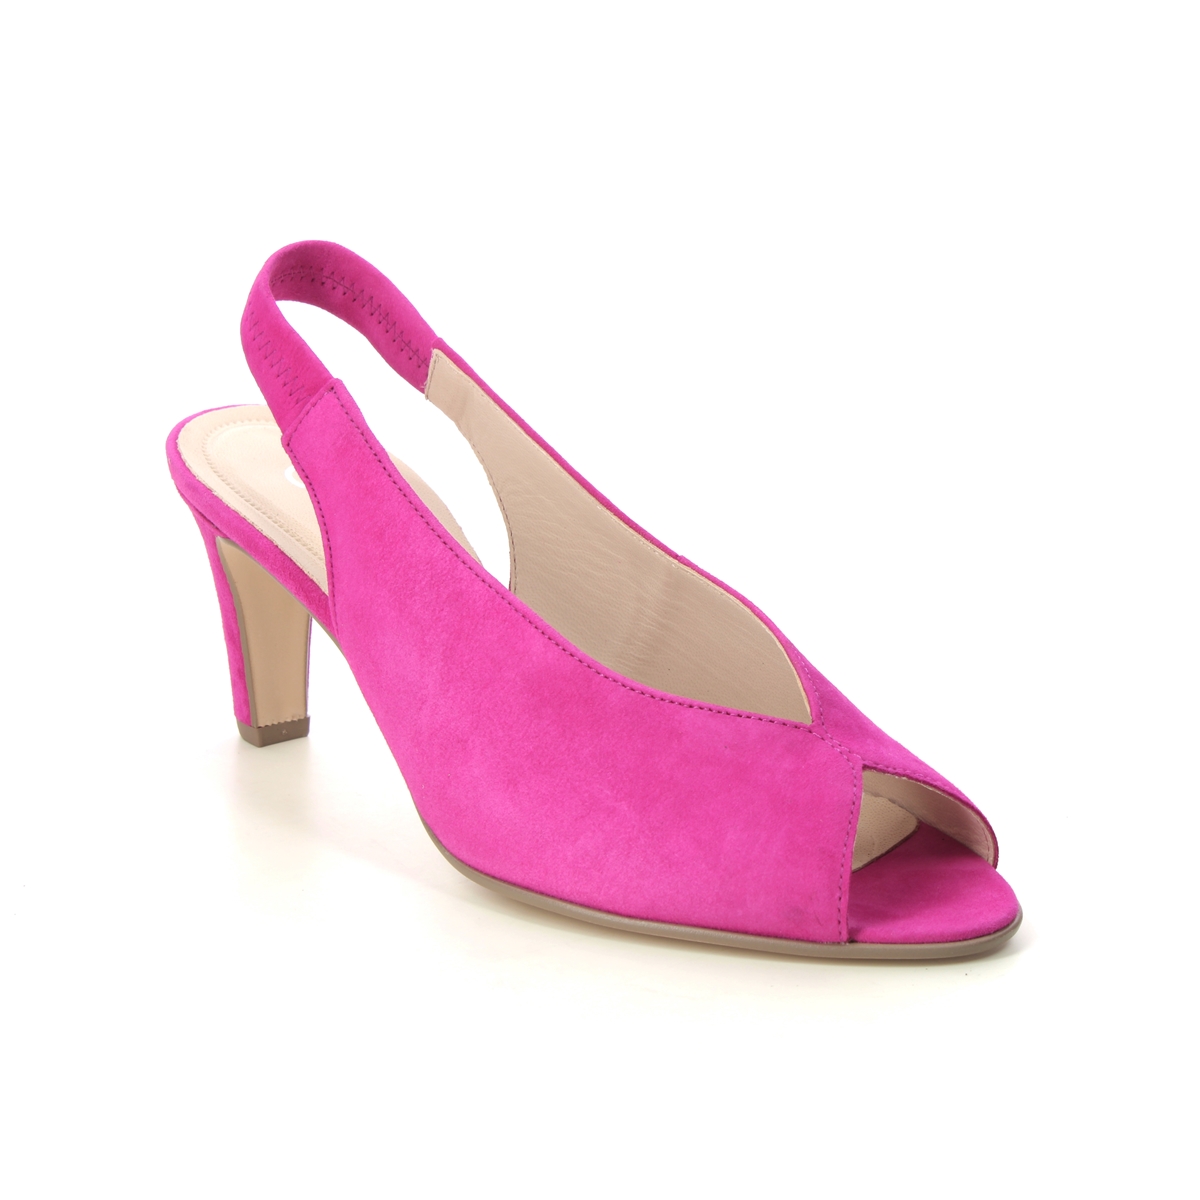 Gabor Eternity Fuchsia Suede Womens Slingback Shoes 41.800.13 in a Plain Leather in Size 4.5